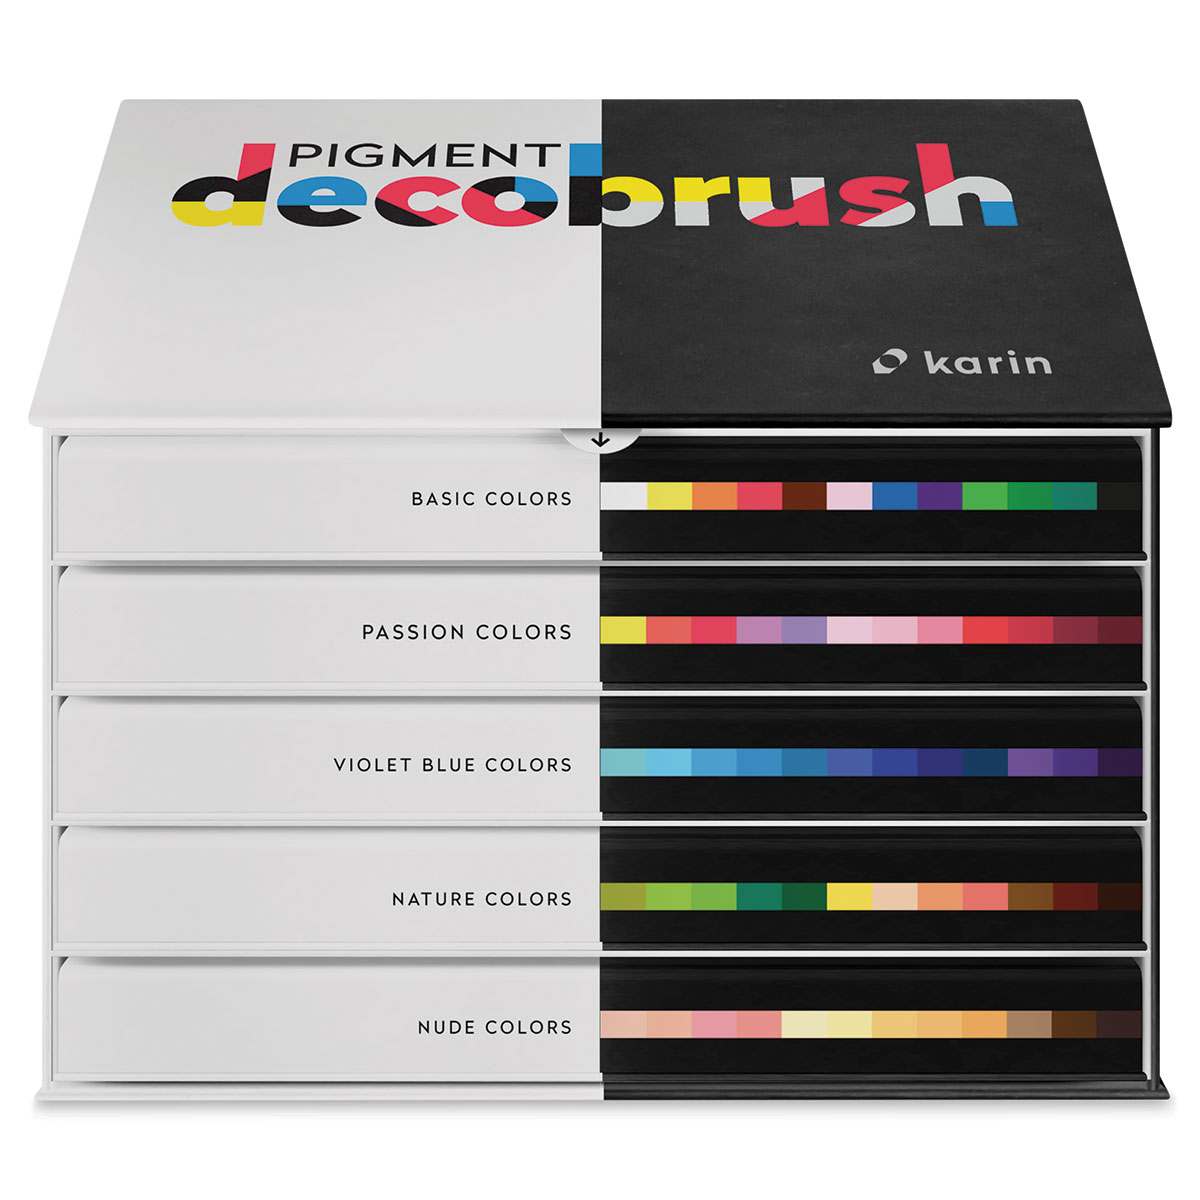 Karin Pigment Decobrush Basic Colors Collection